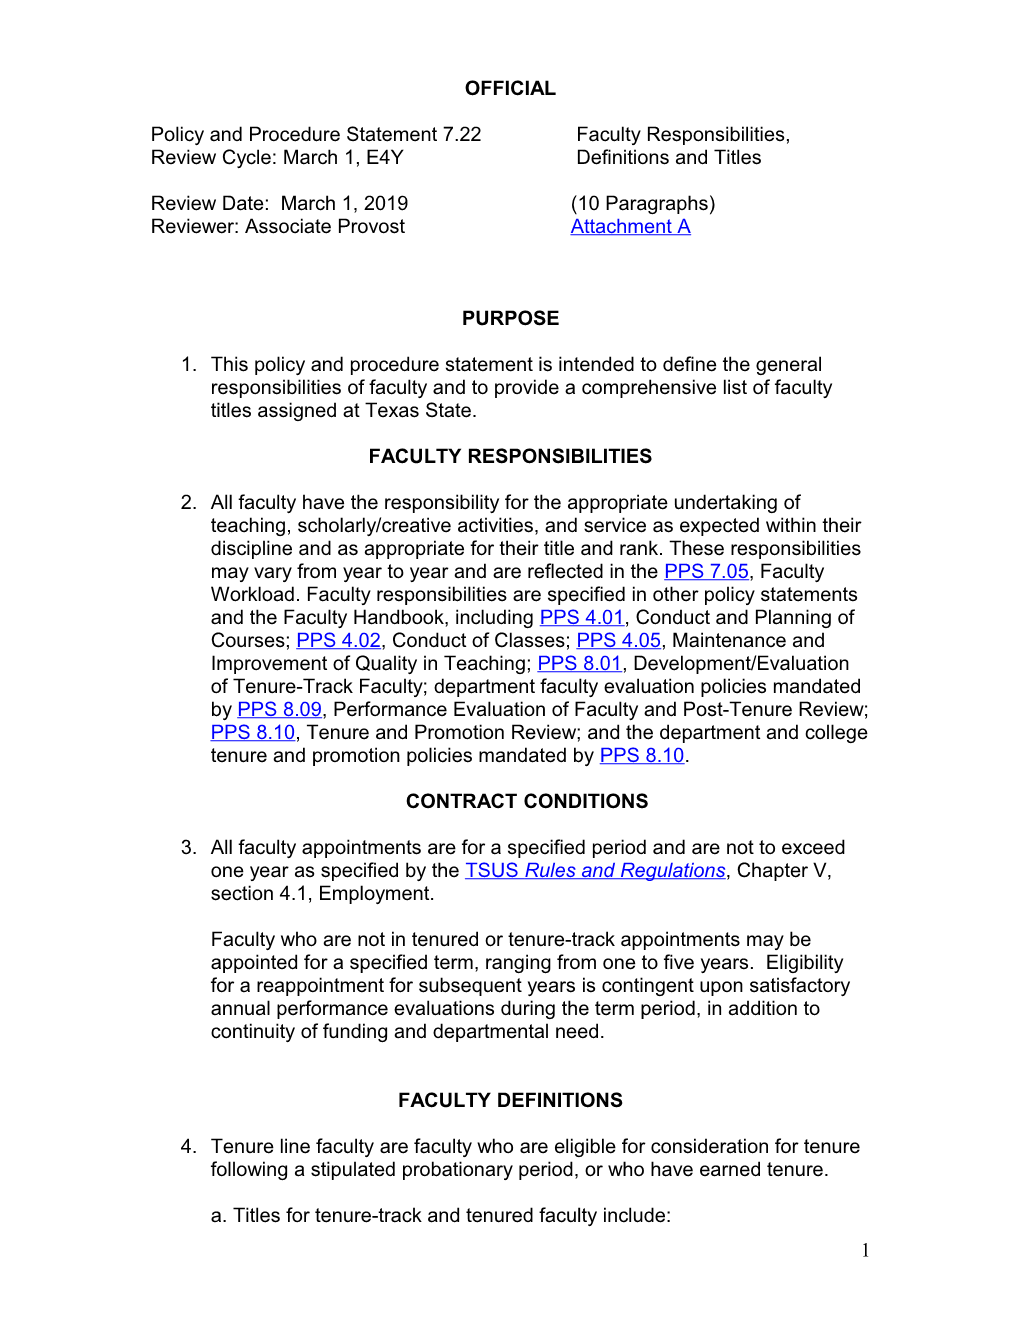 Policy and Procedure Statement 7.22Faculty Responsibilities